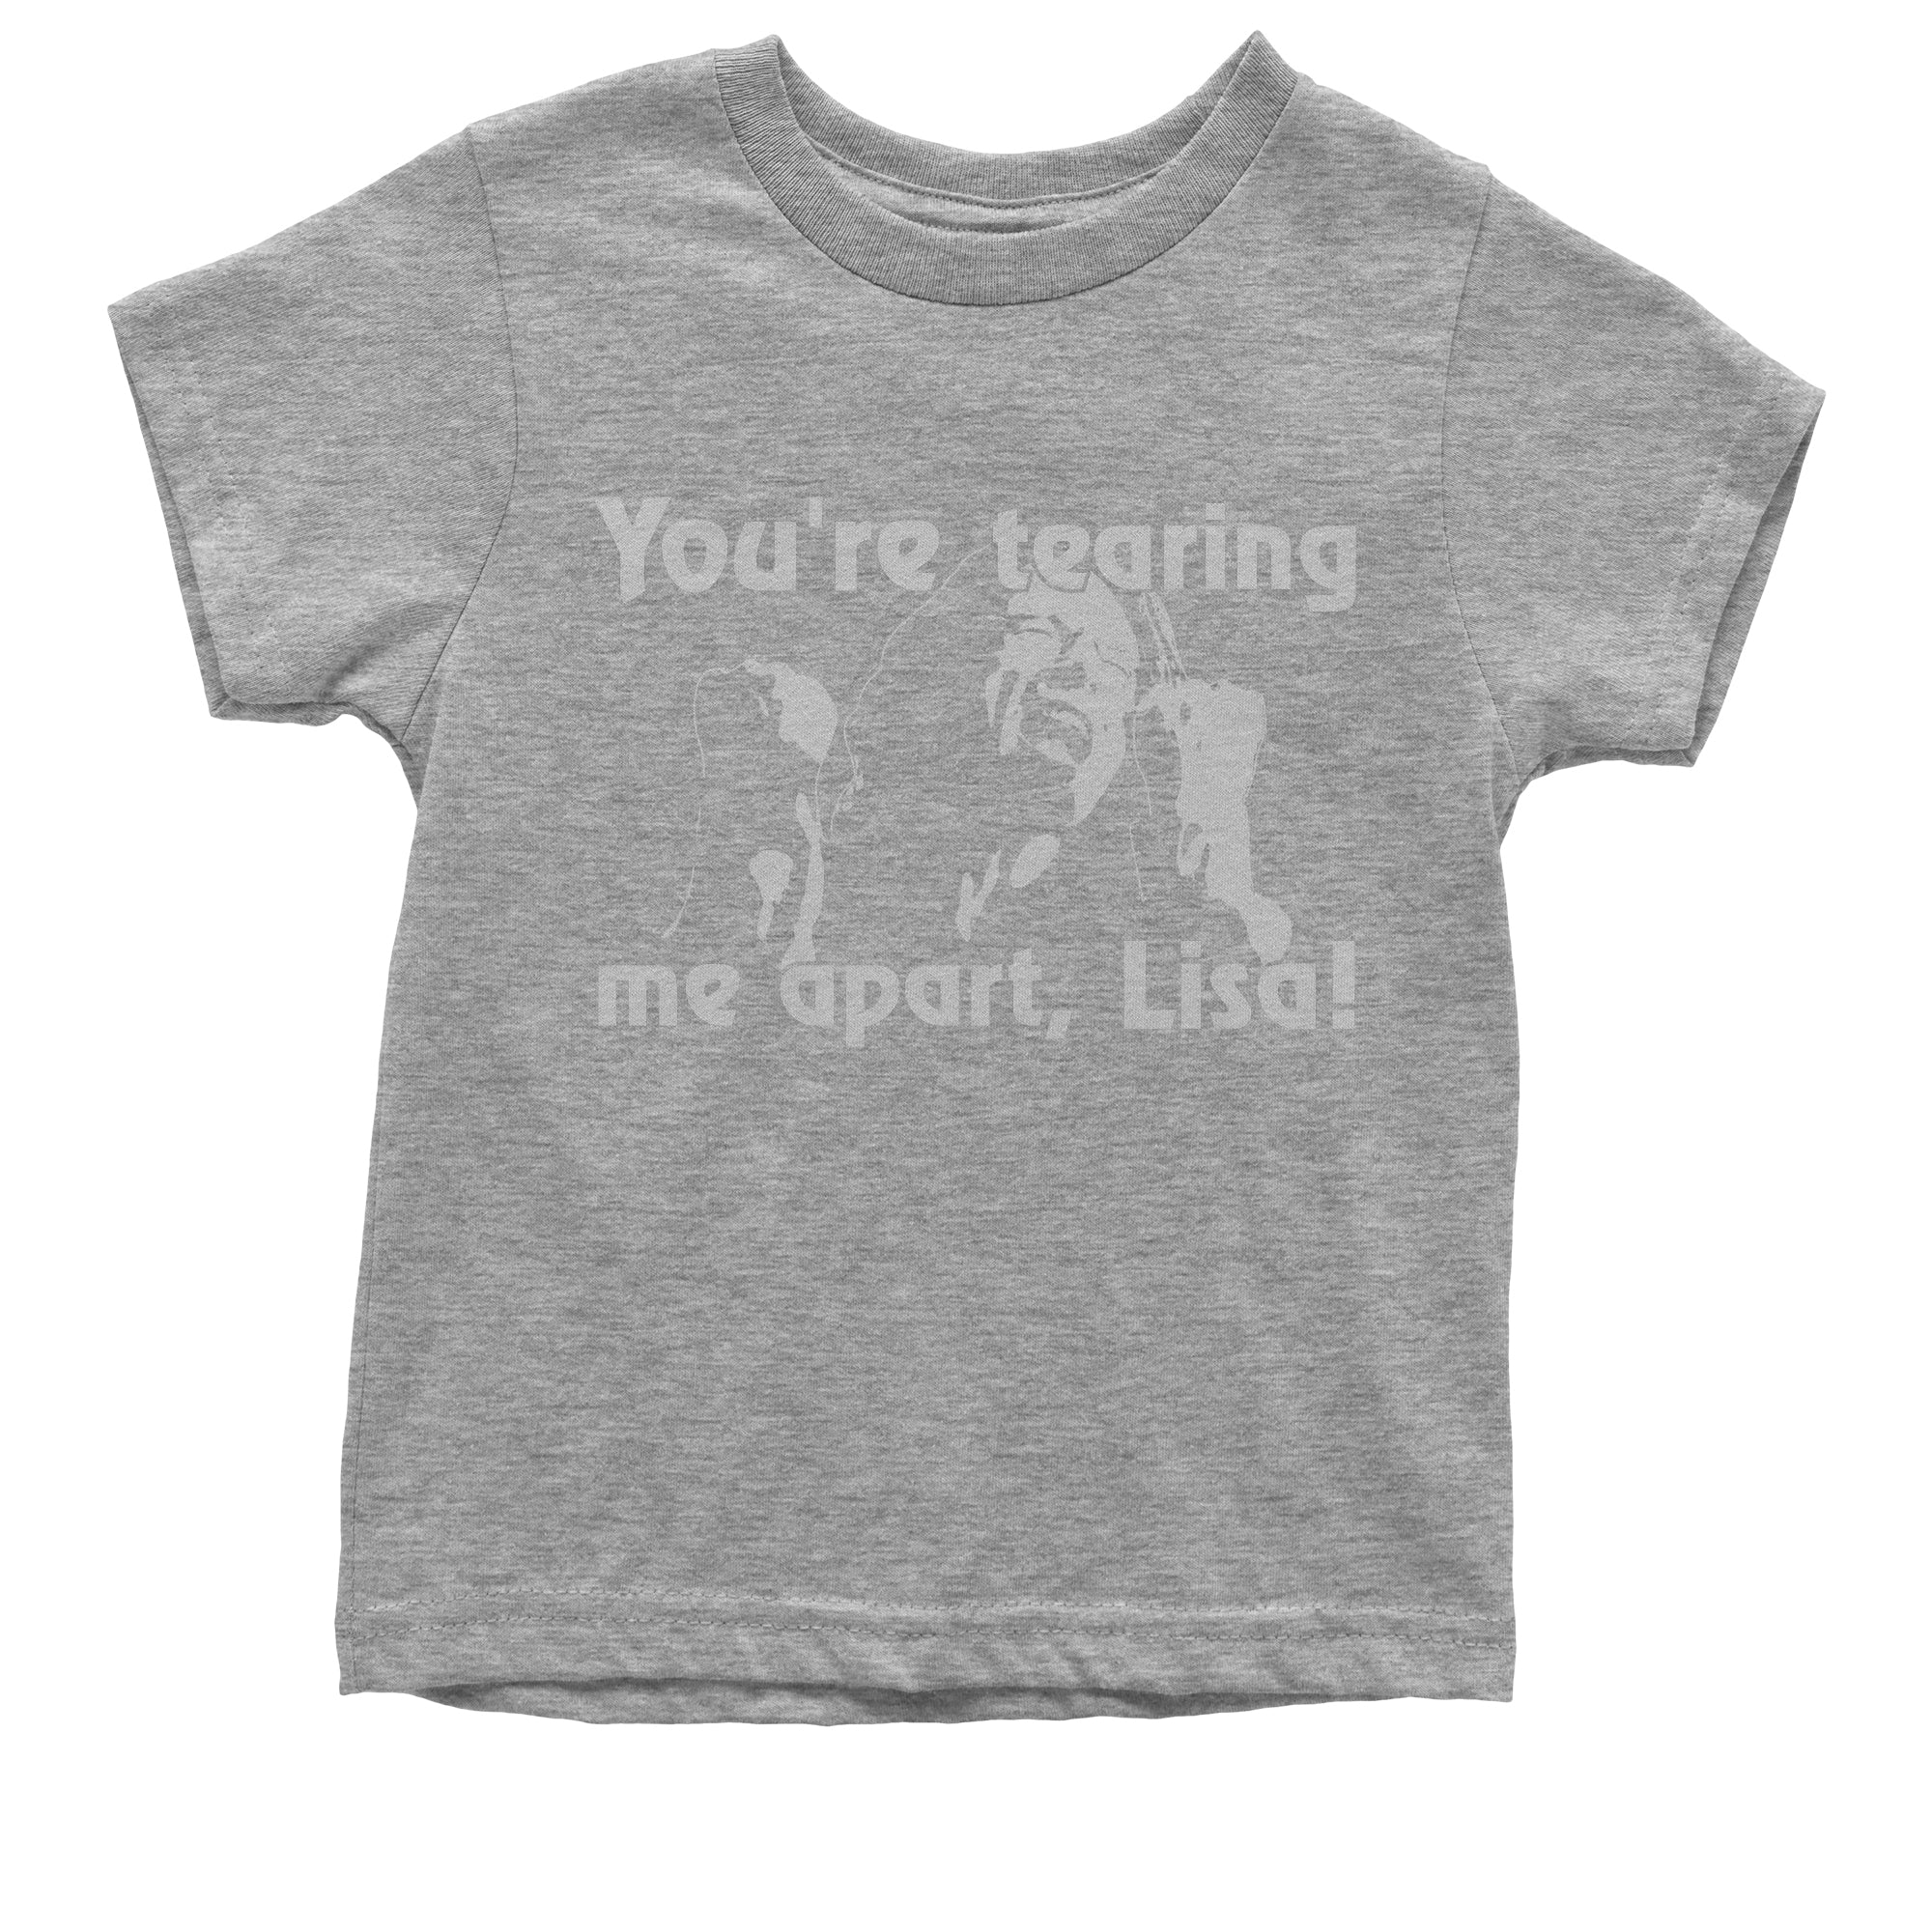 You're Tearing Me Apart Lisa Tommy Room Kid's T-Shirt